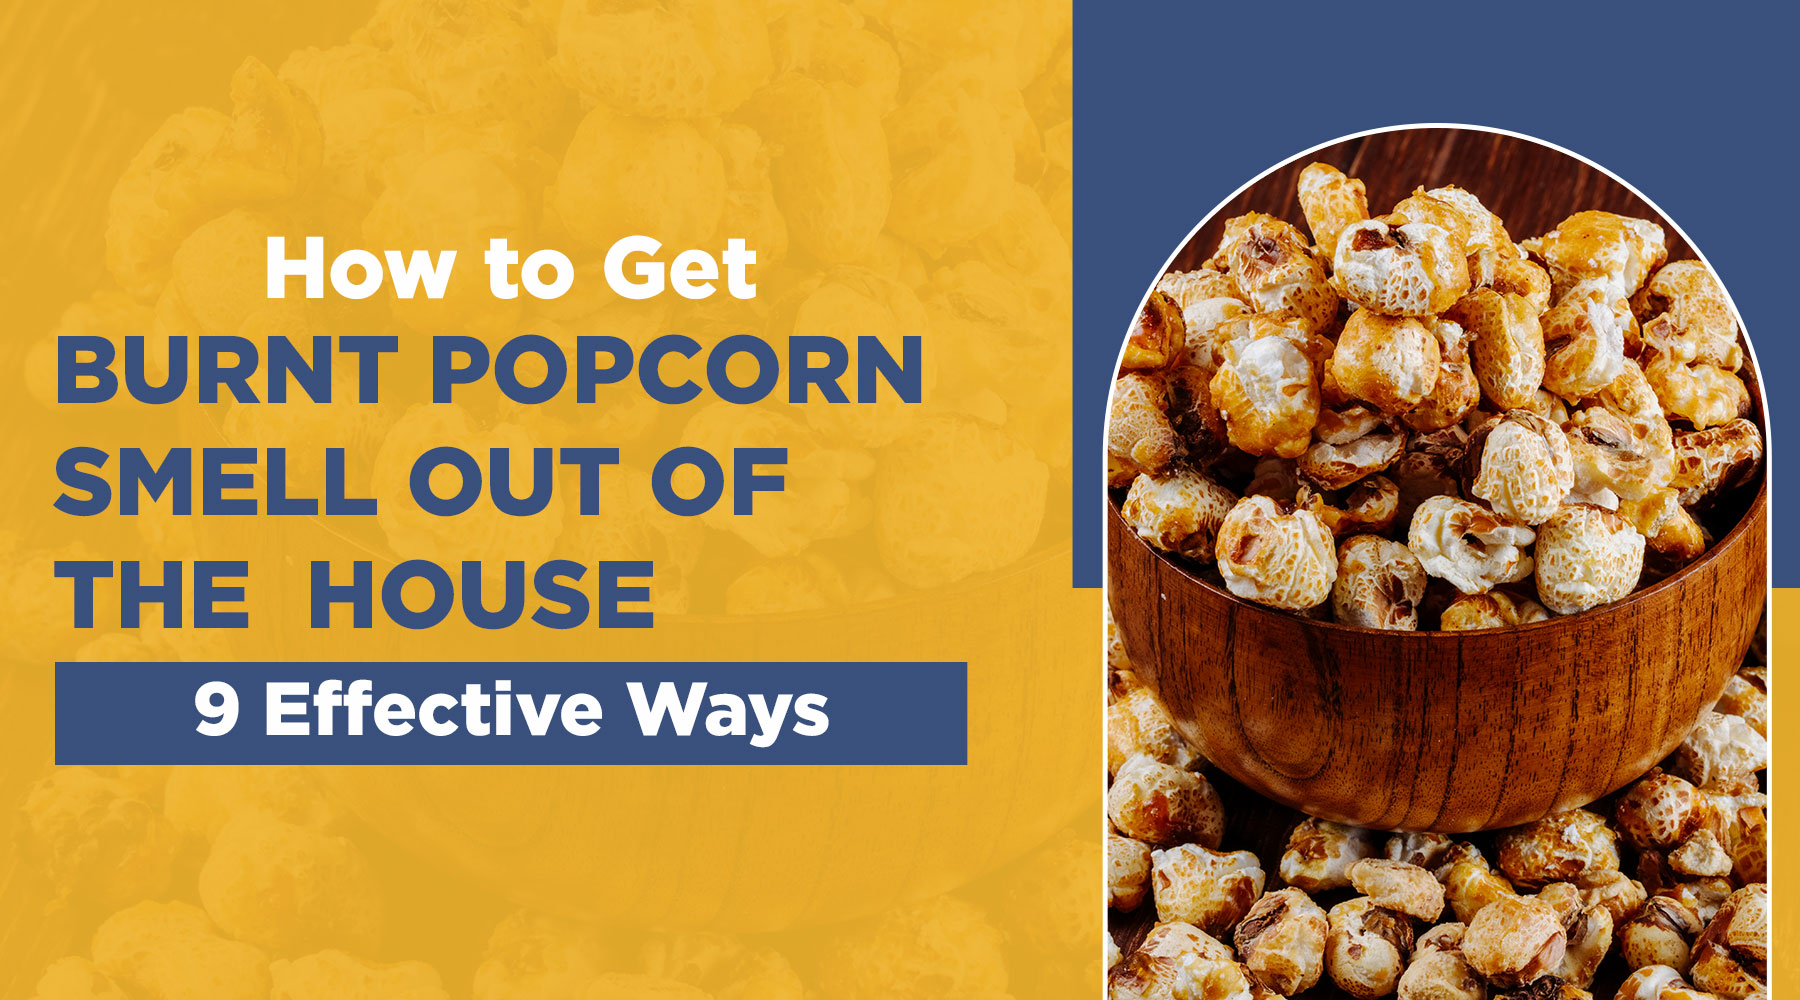 How to get burnt popcorn smell out of house